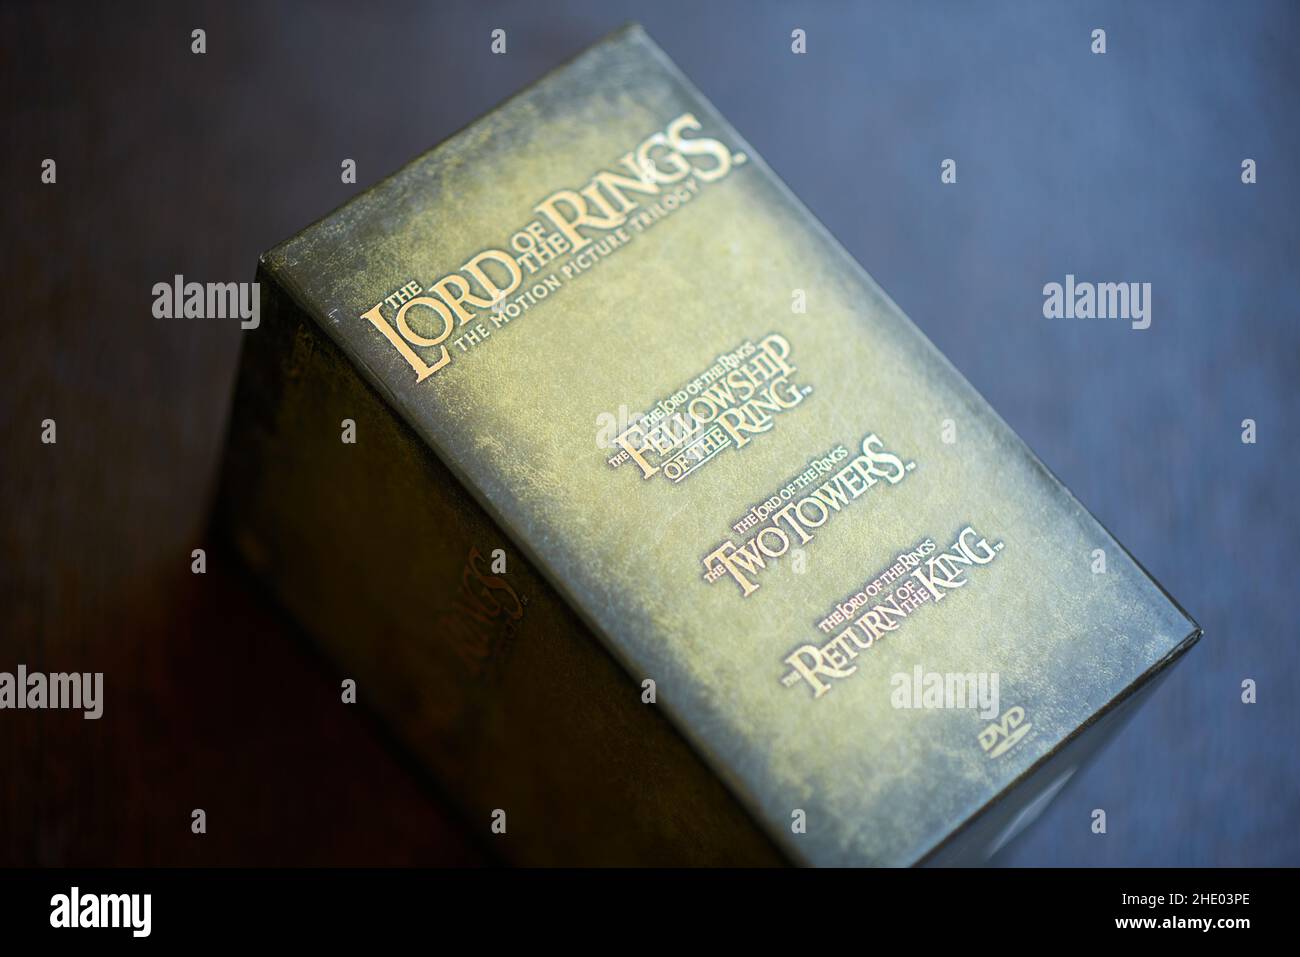 Astrakhan, Russia - 04.27.2021: The cover of the collector's edition of the extended version of the Lord of the Rings movie Stock Photo